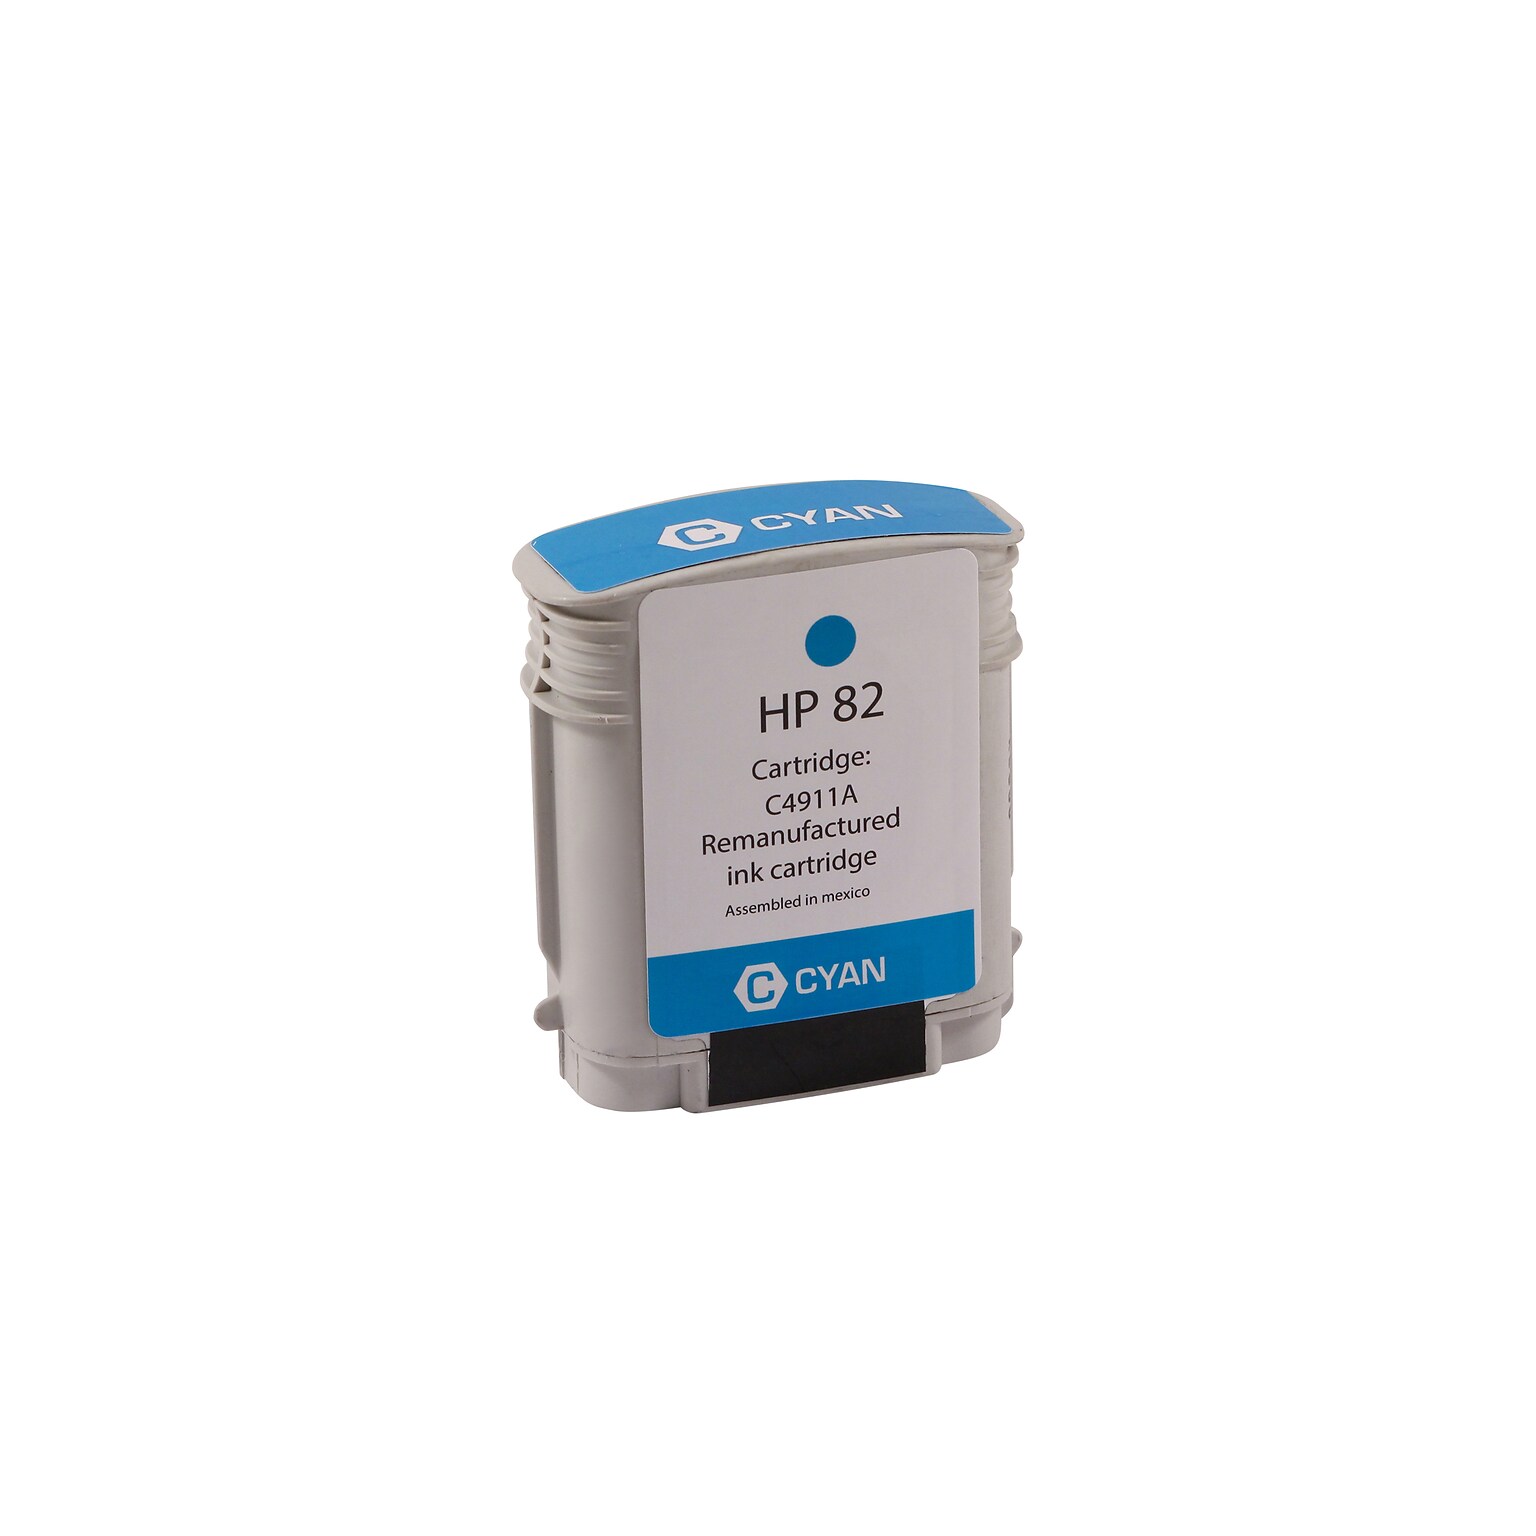 Clover Imaging Group Remanufactured Cyan High Yield Wide Format Inkjet Cartridge Replacement for HP 82 (C4911A)